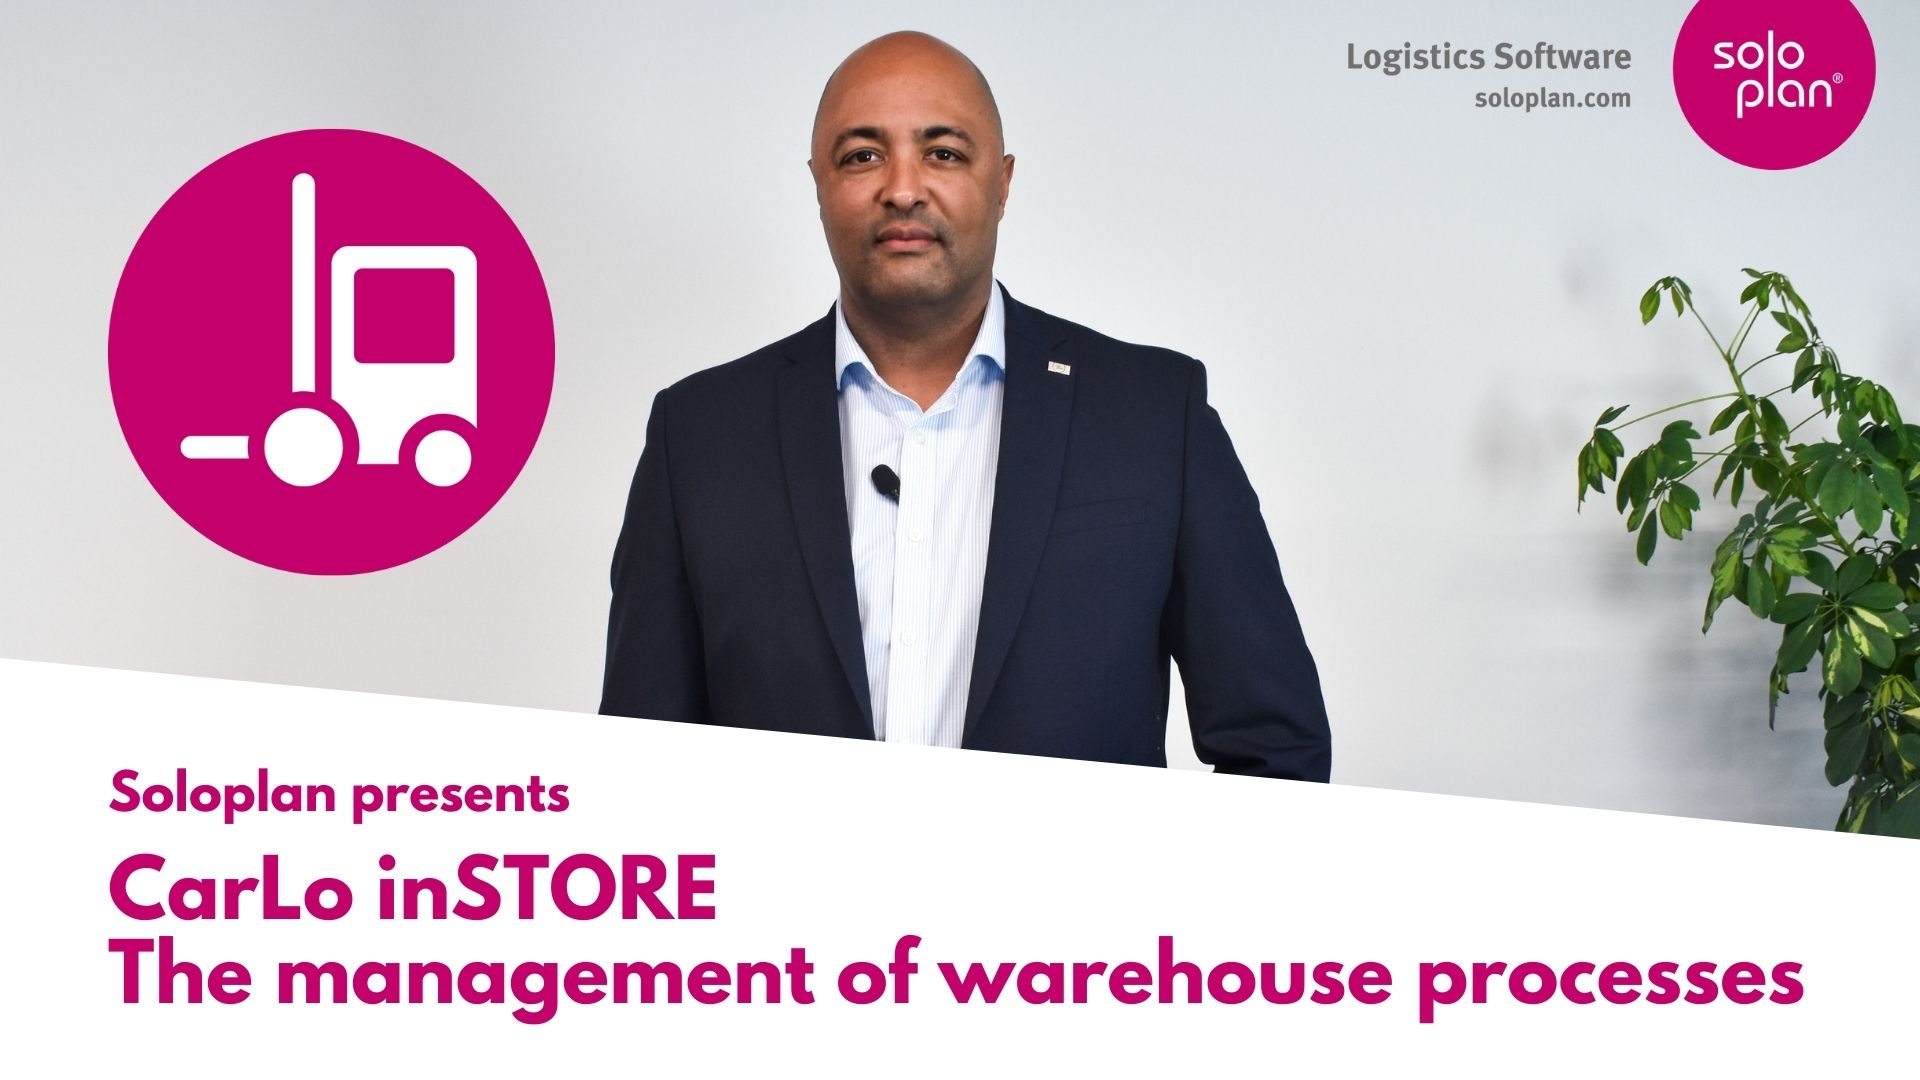 CarLo inSTORE - The management of warehouse processes